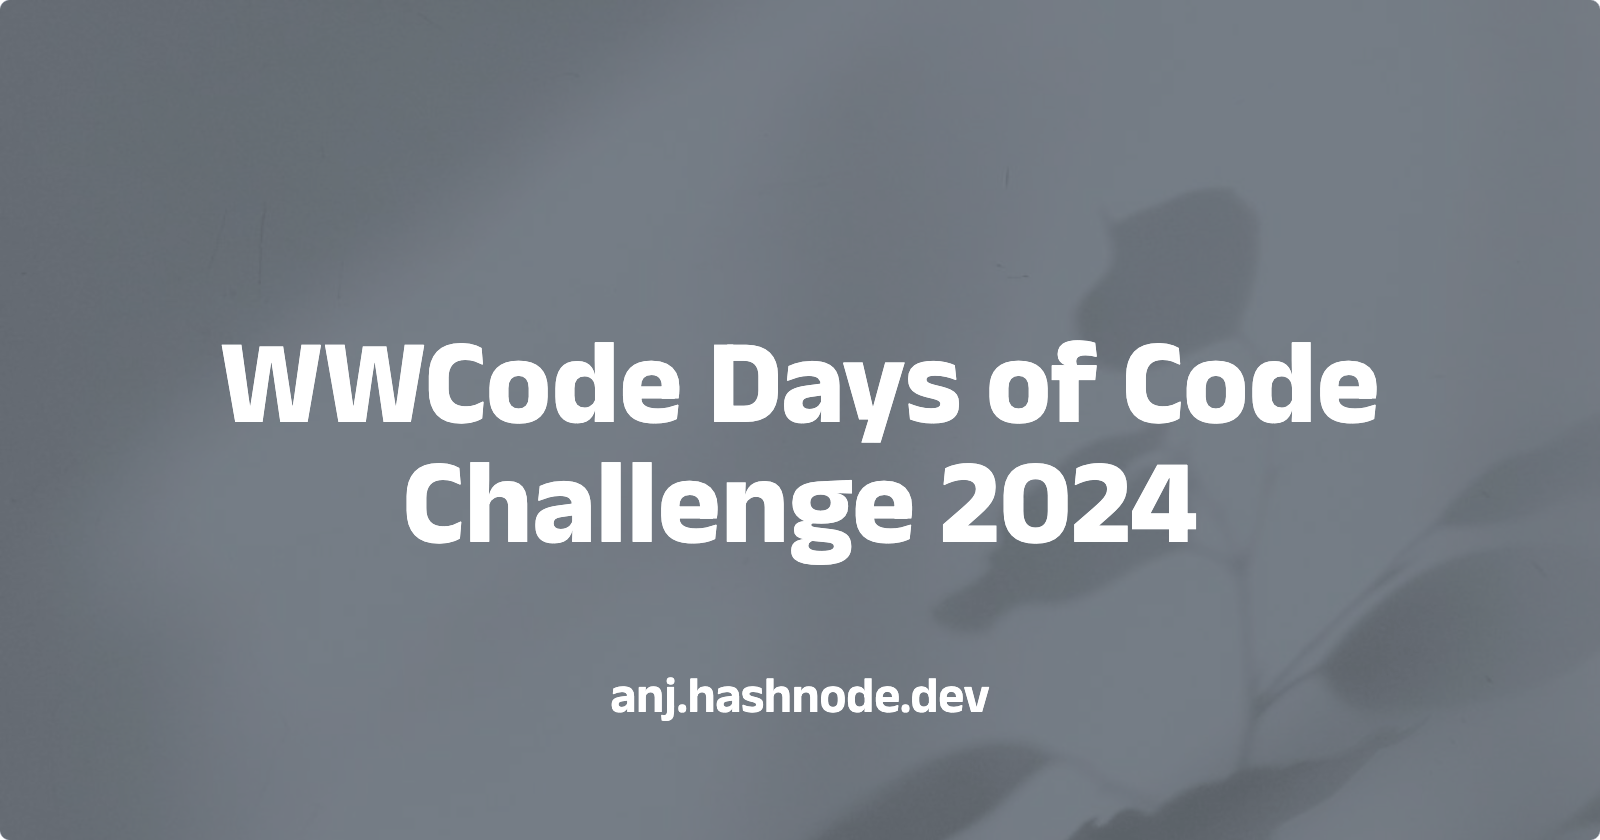 Coding Challenge #00: Step-by-step guide on how to solve daily coding challenges